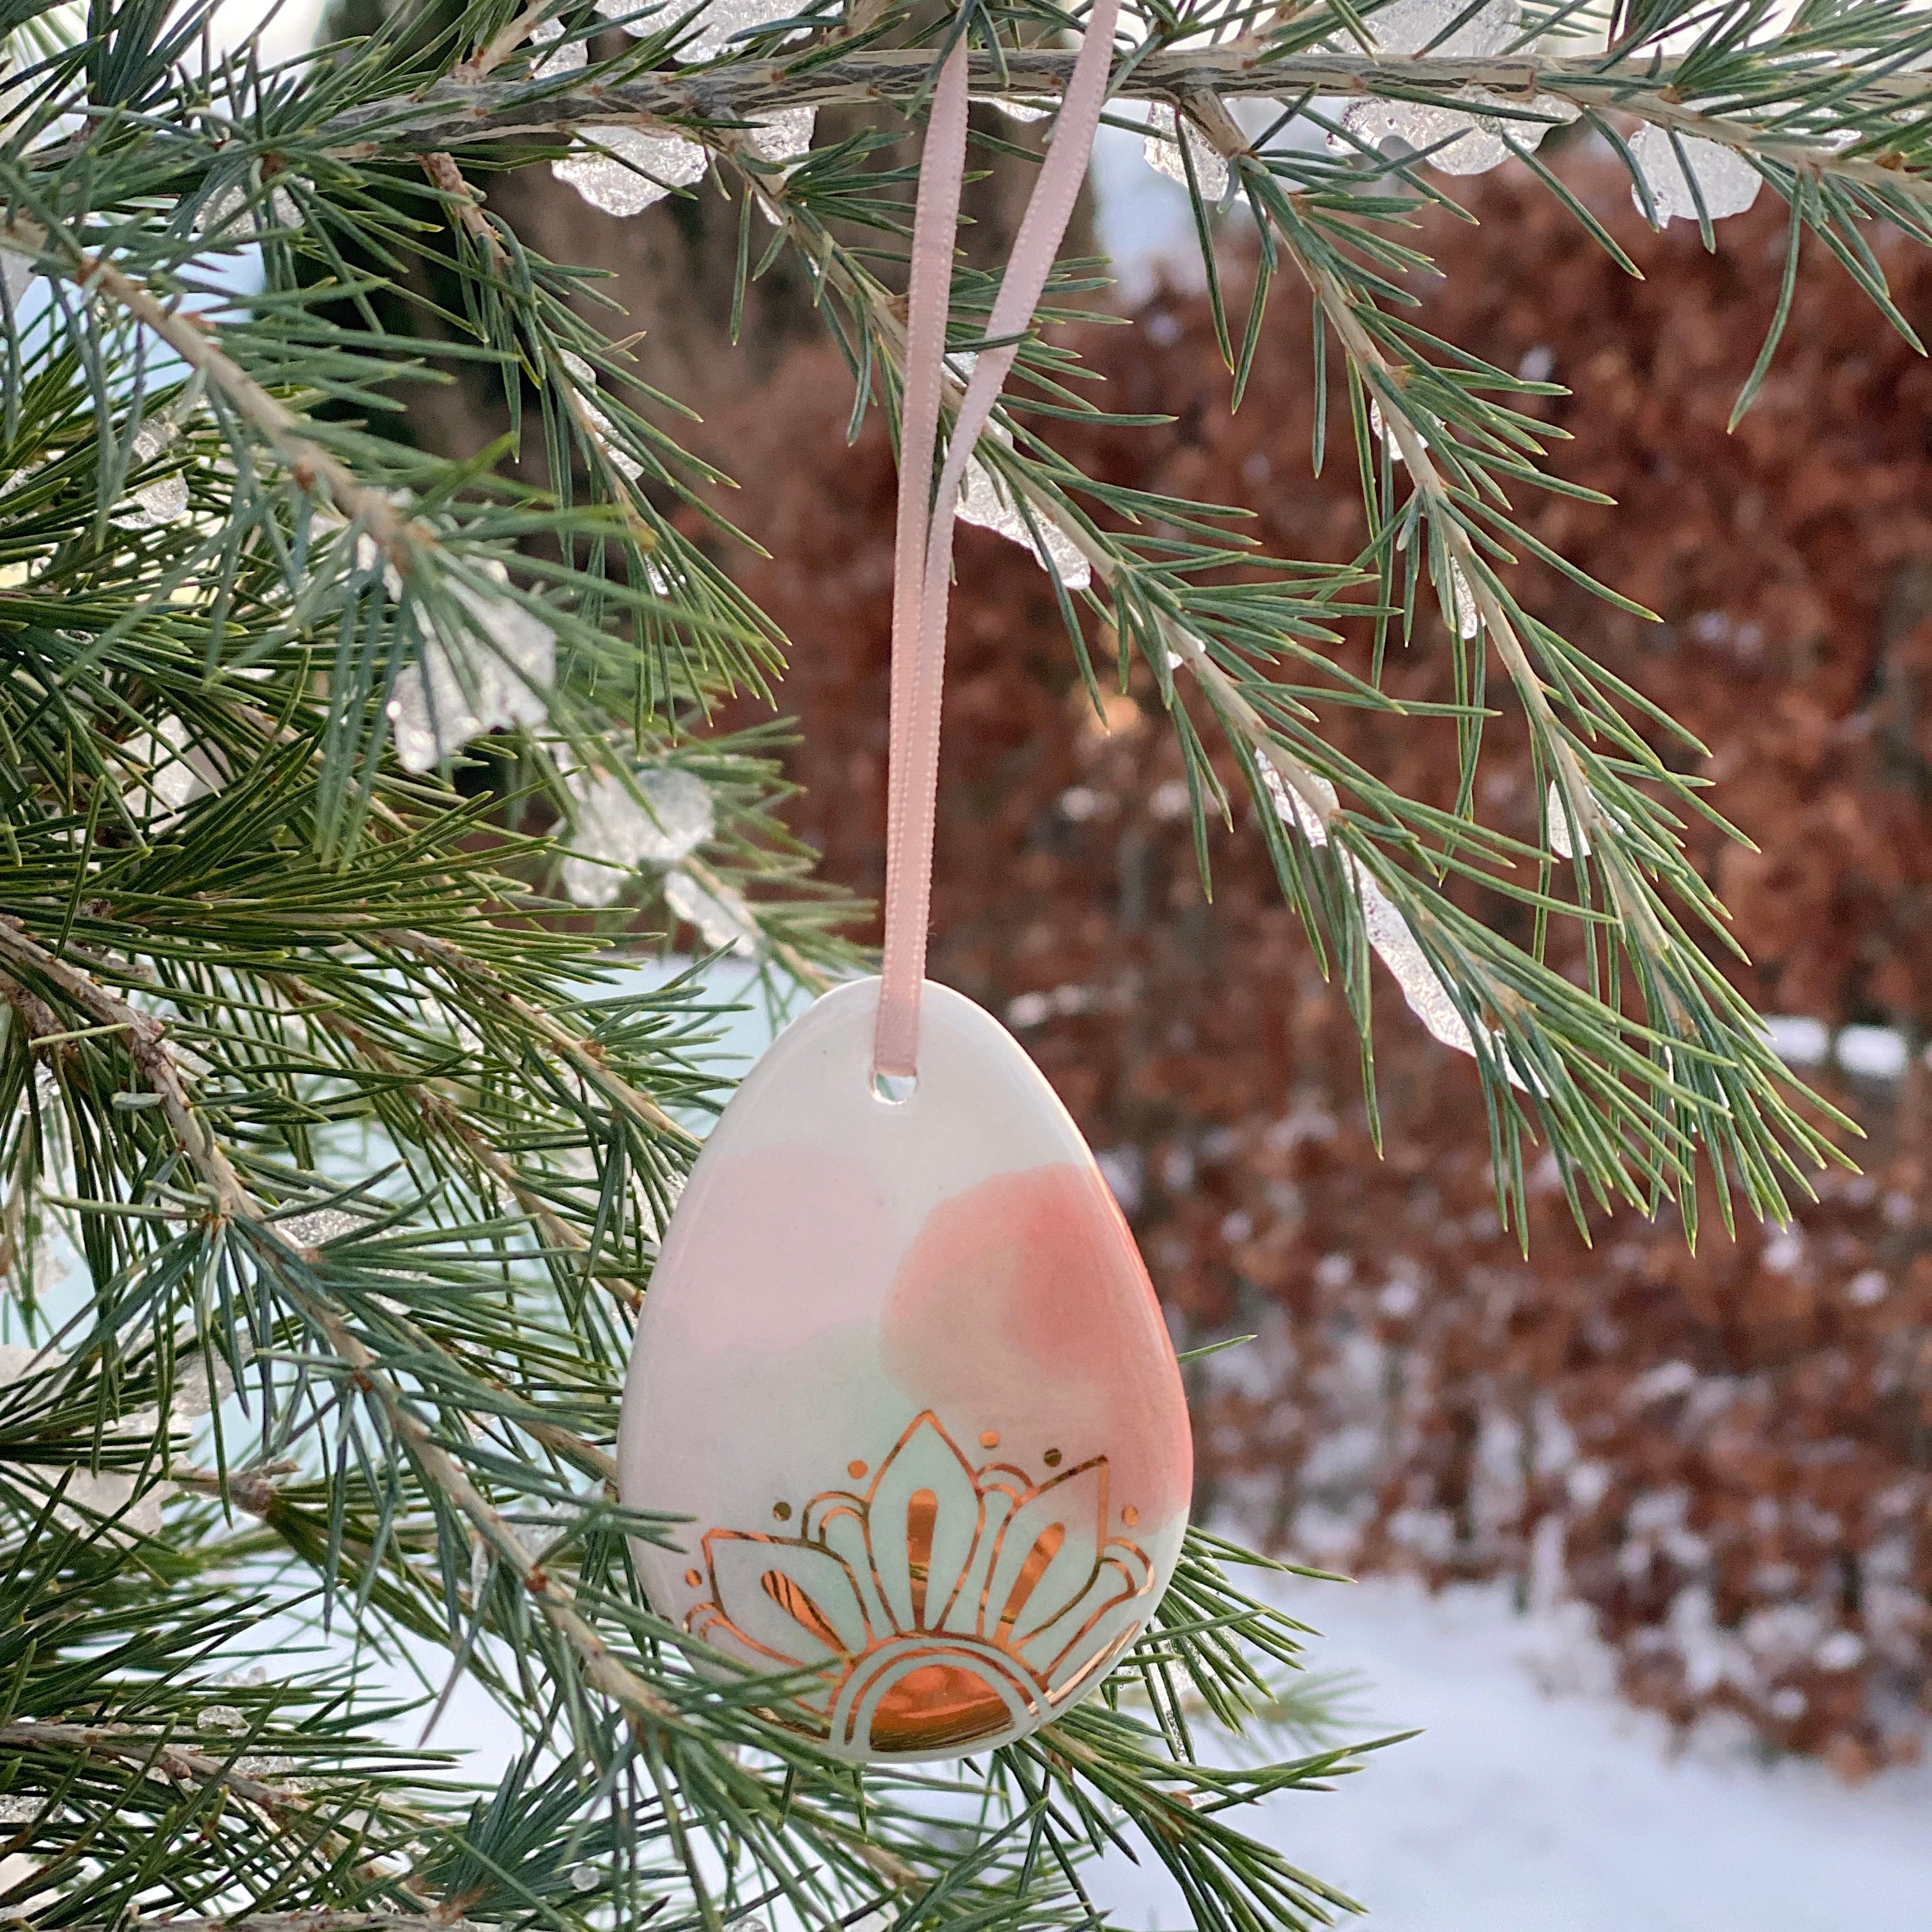 Marinski Easter egg no 1 - blush, coral, mint and with floral pattern in gold